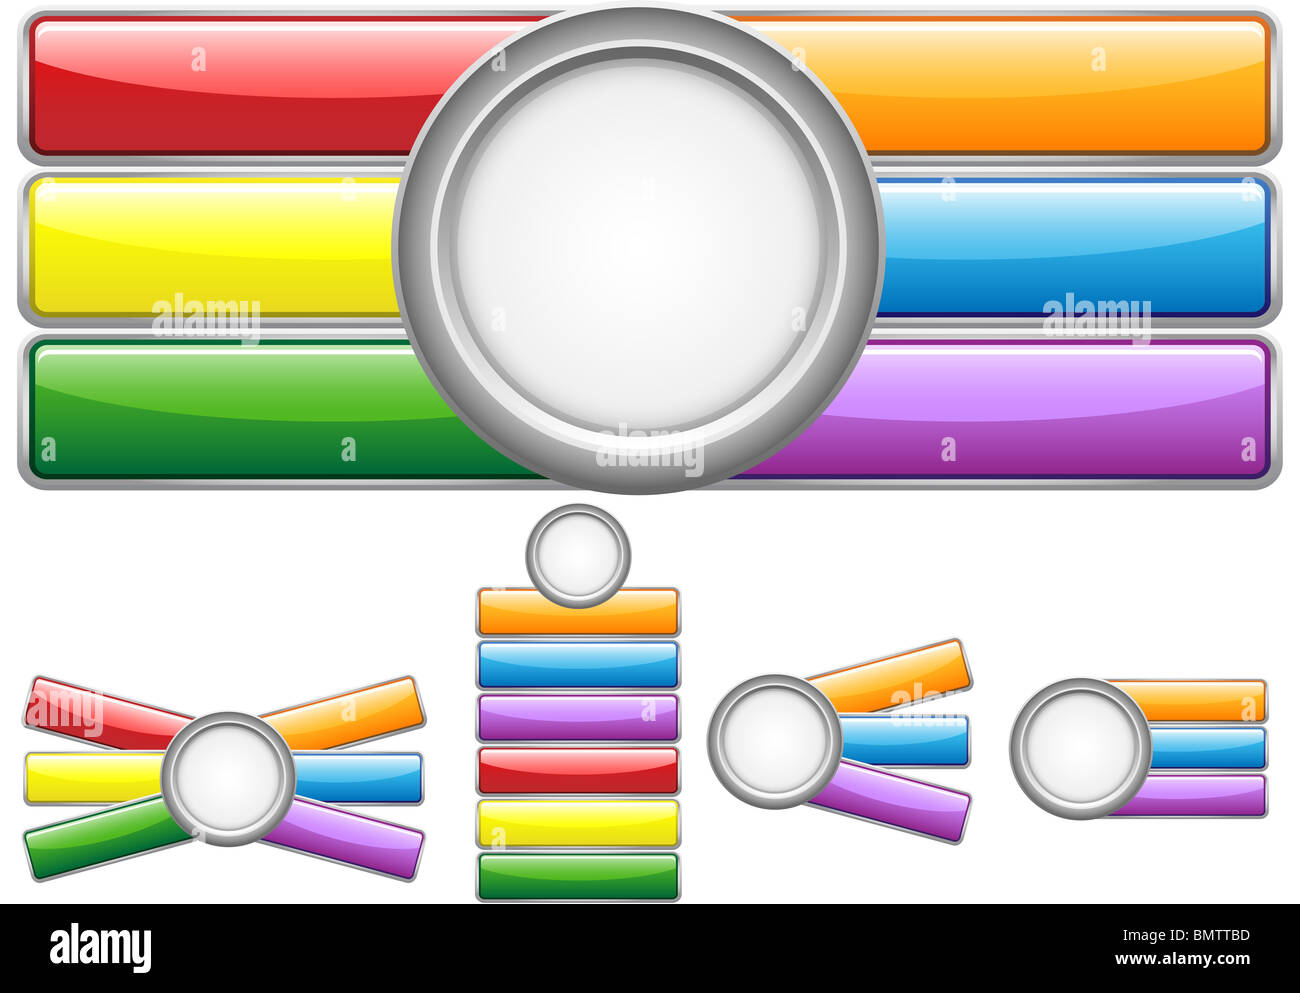 Glossy web buttons with colored bars. Stock Photo